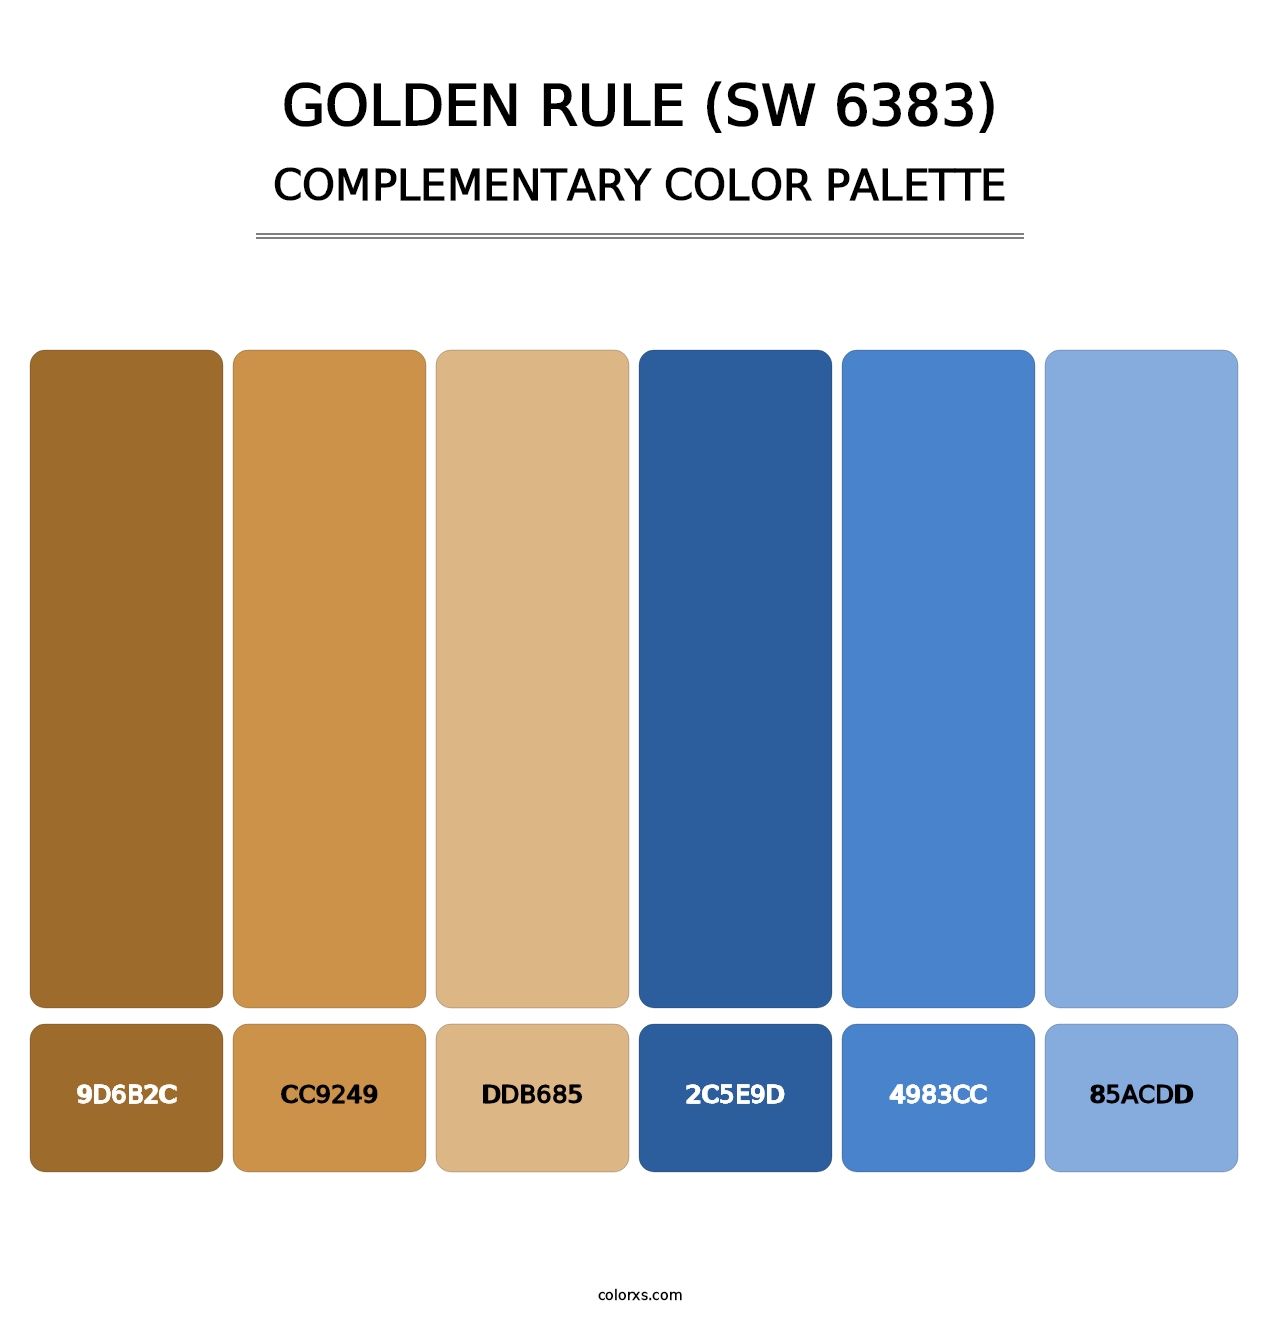 Golden Rule (SW 6383) - Complementary Color Palette